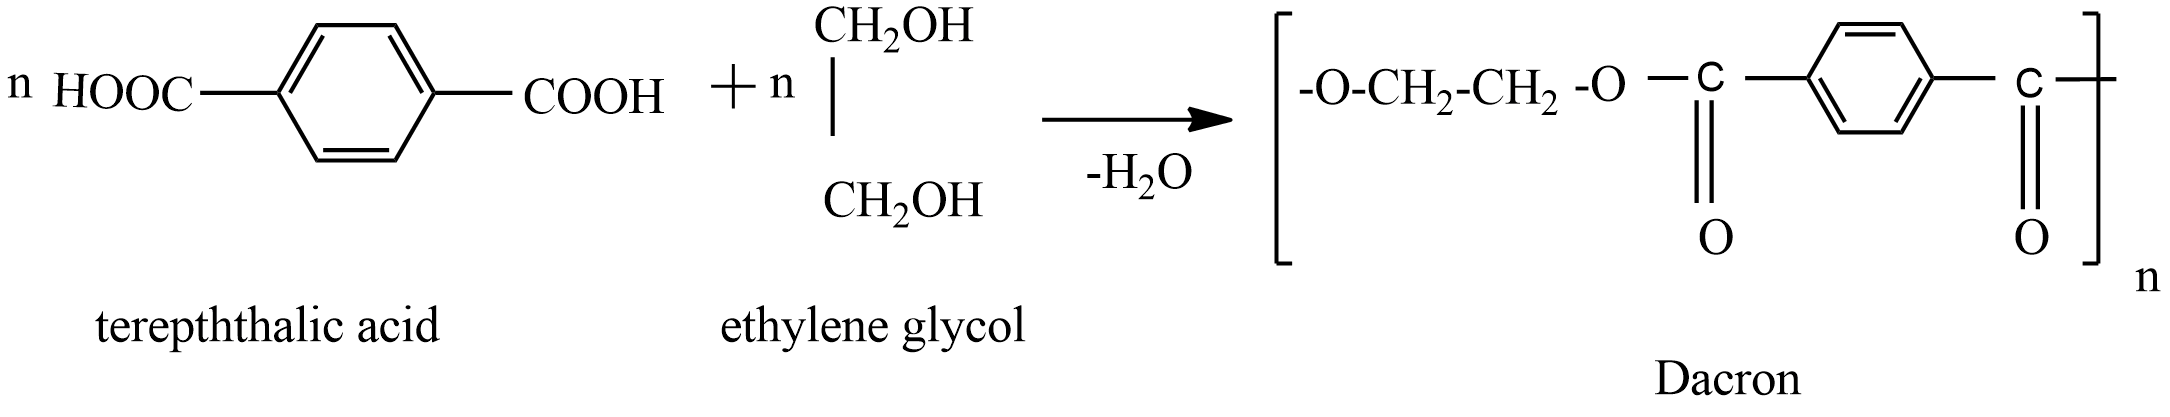 Dacron is obtained by the condensation polymerization of:(A) dimethyl  terephthalate and ethylene glycol(B) terephthalic acid and ethylene  glycol(C) phenol and phthalic acid(D) phenol and formaldehyde